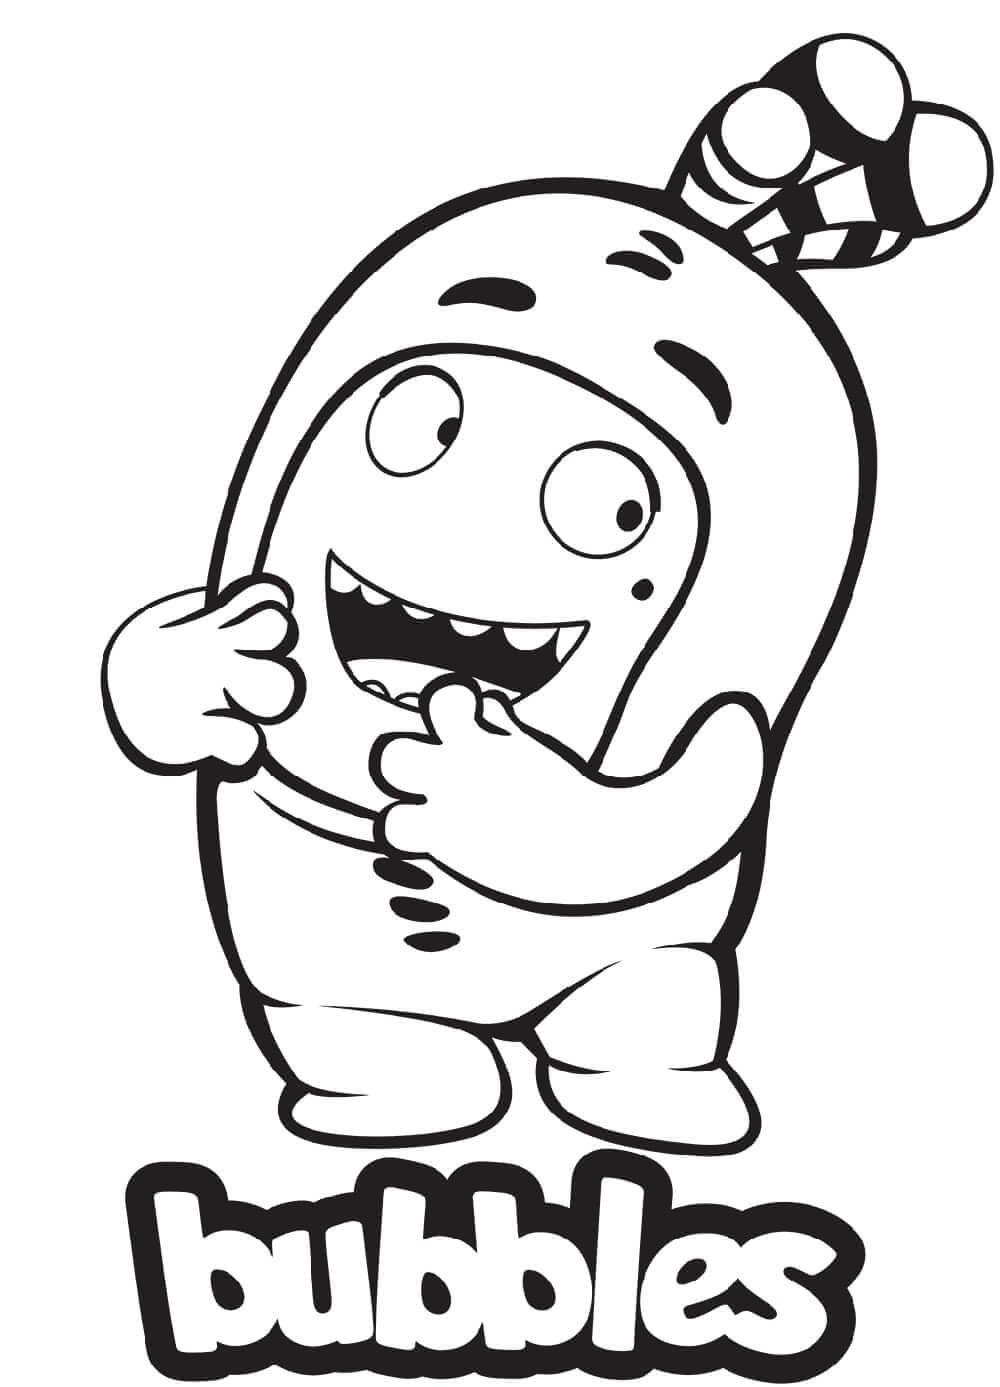 Zee Oddbods Coloring Page - Free Printable Coloring Pages for Kids